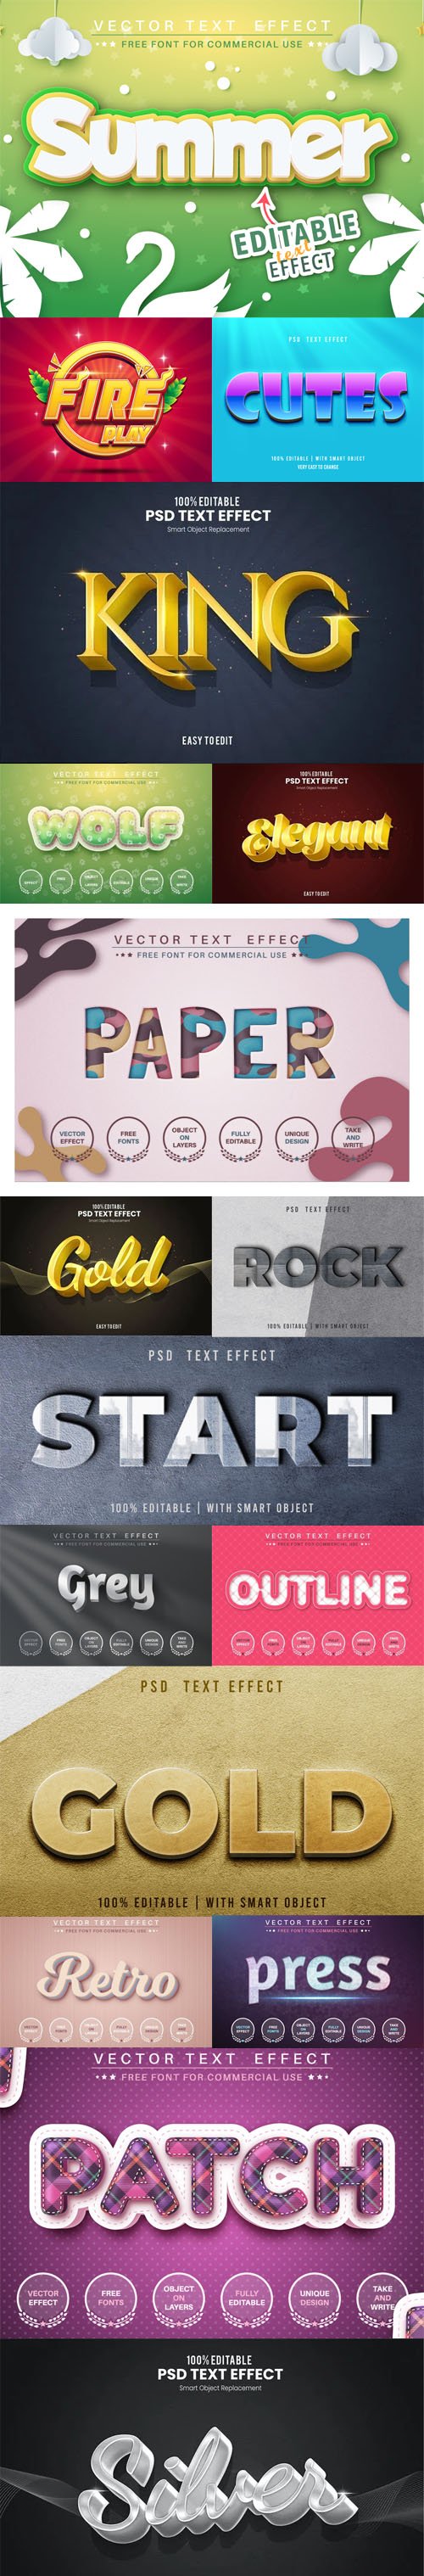 Text Effects Pack for Adobe Photoshop (PSD) & Illustrator (Ai-EPS)